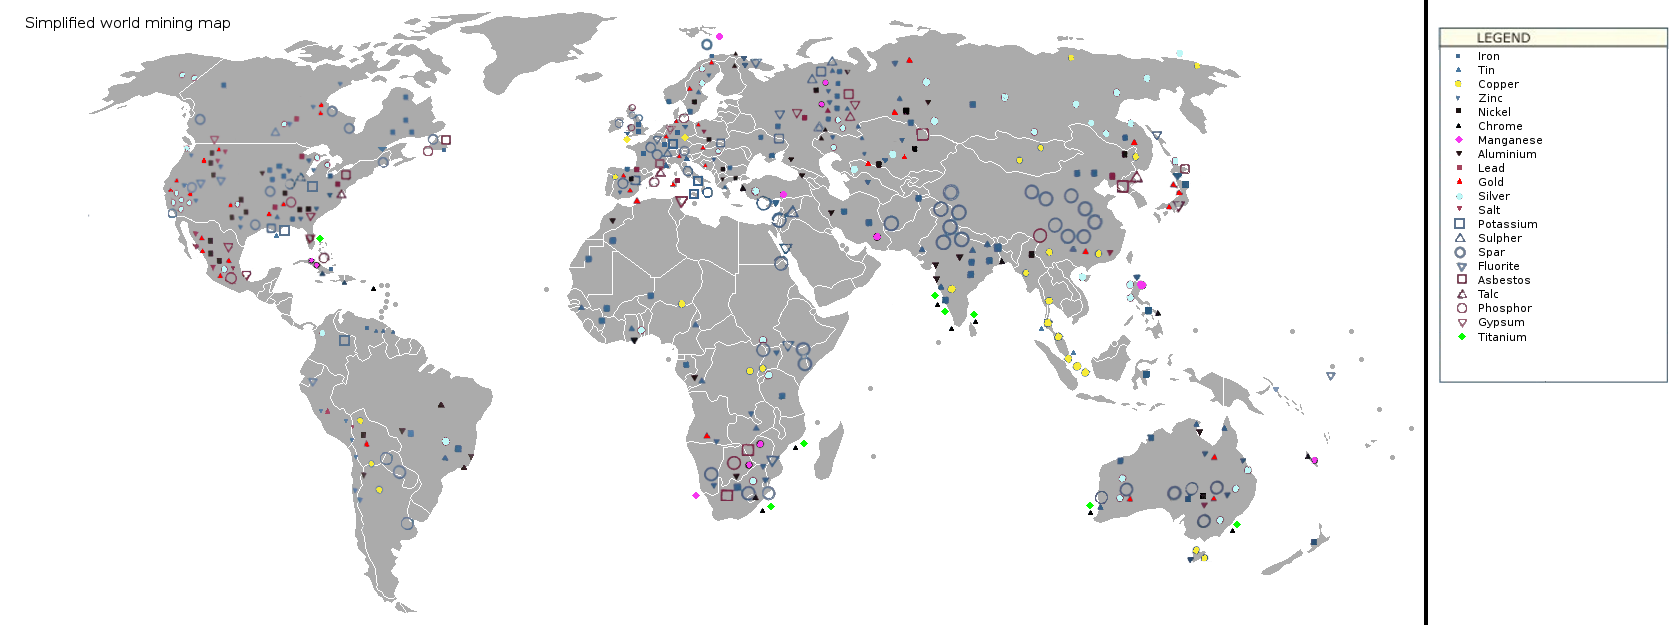 The map shows many different materials that are mined across the world.